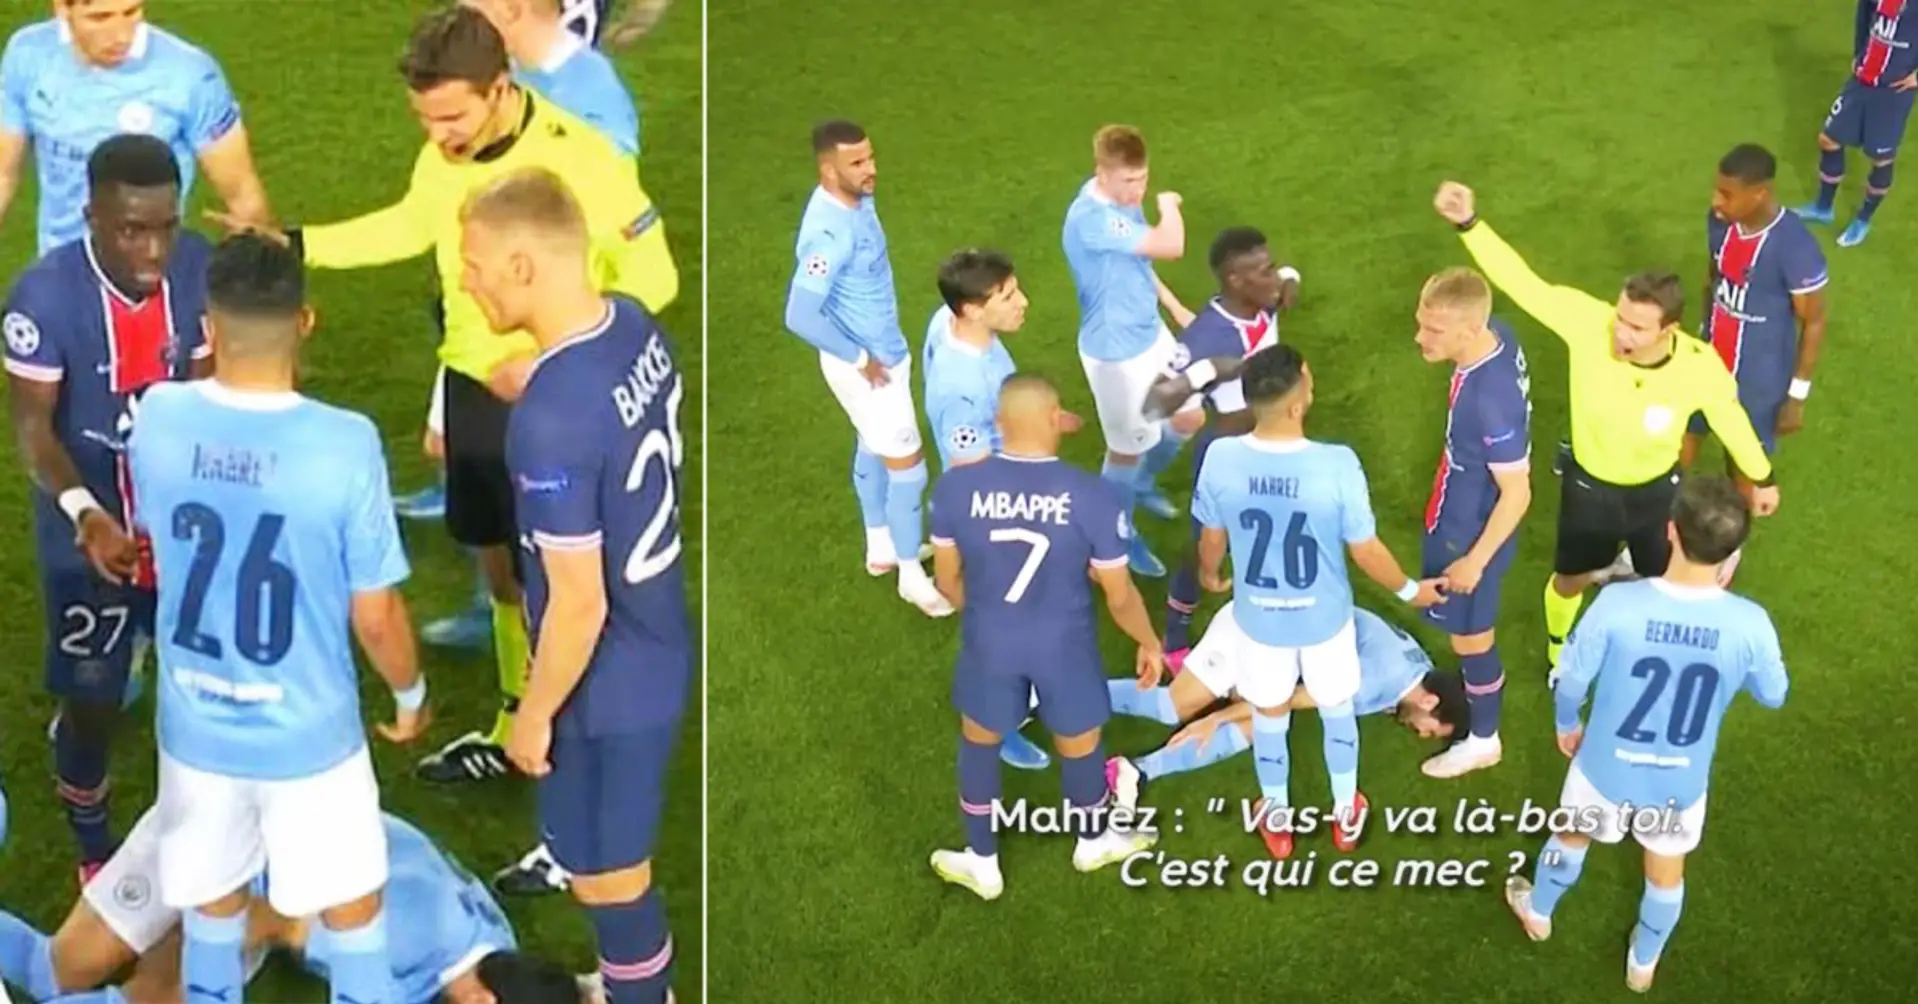 'Who is even this guy?': What exactly happened during PSG-City game – explained